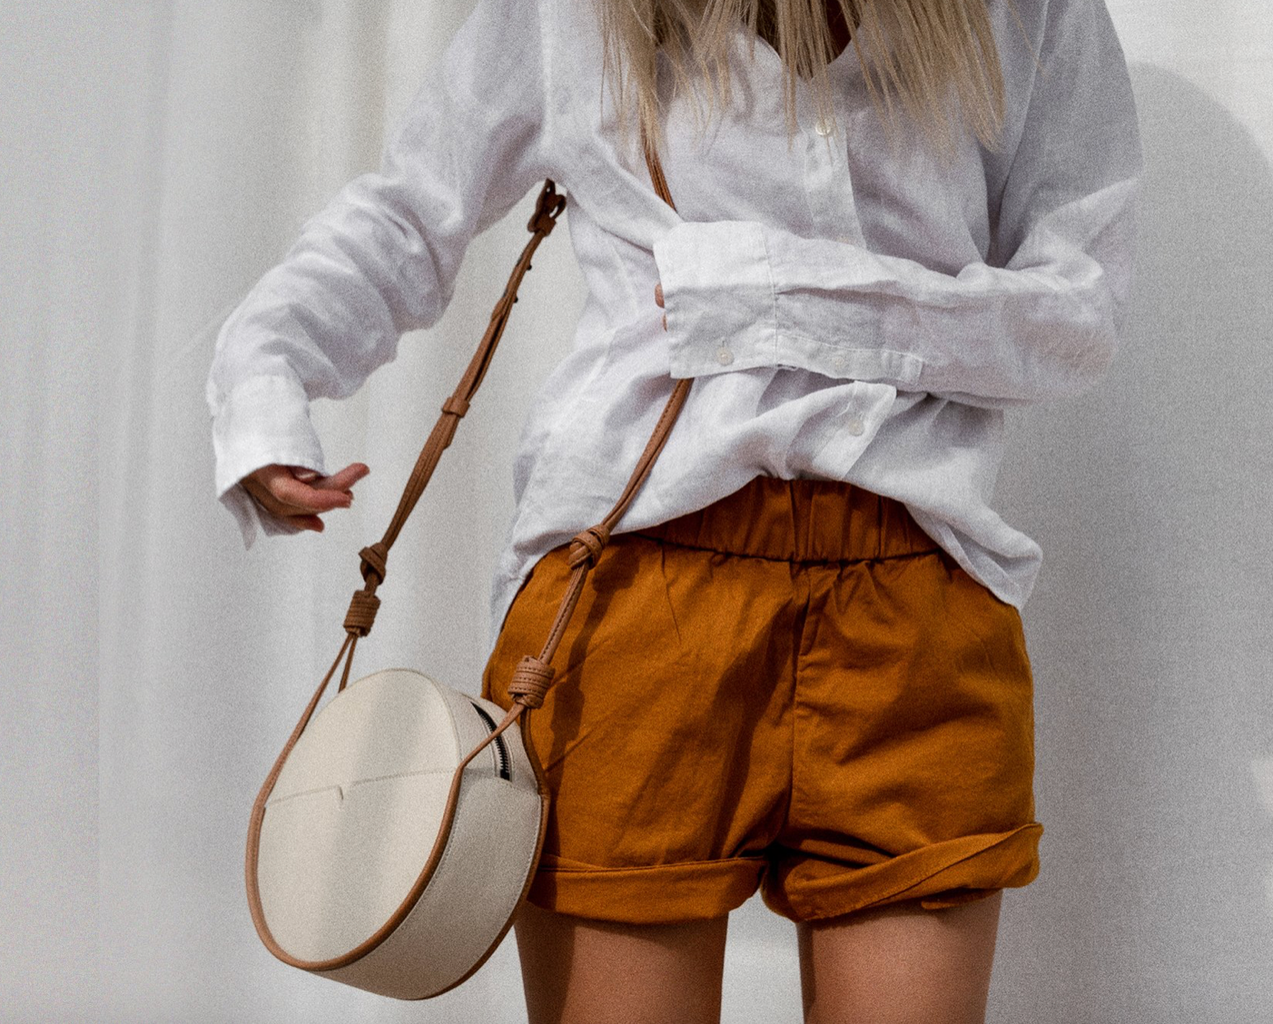 the von Holzhausen circular crossbody bag, woman carrying white and yellow bag over one of her shoulders